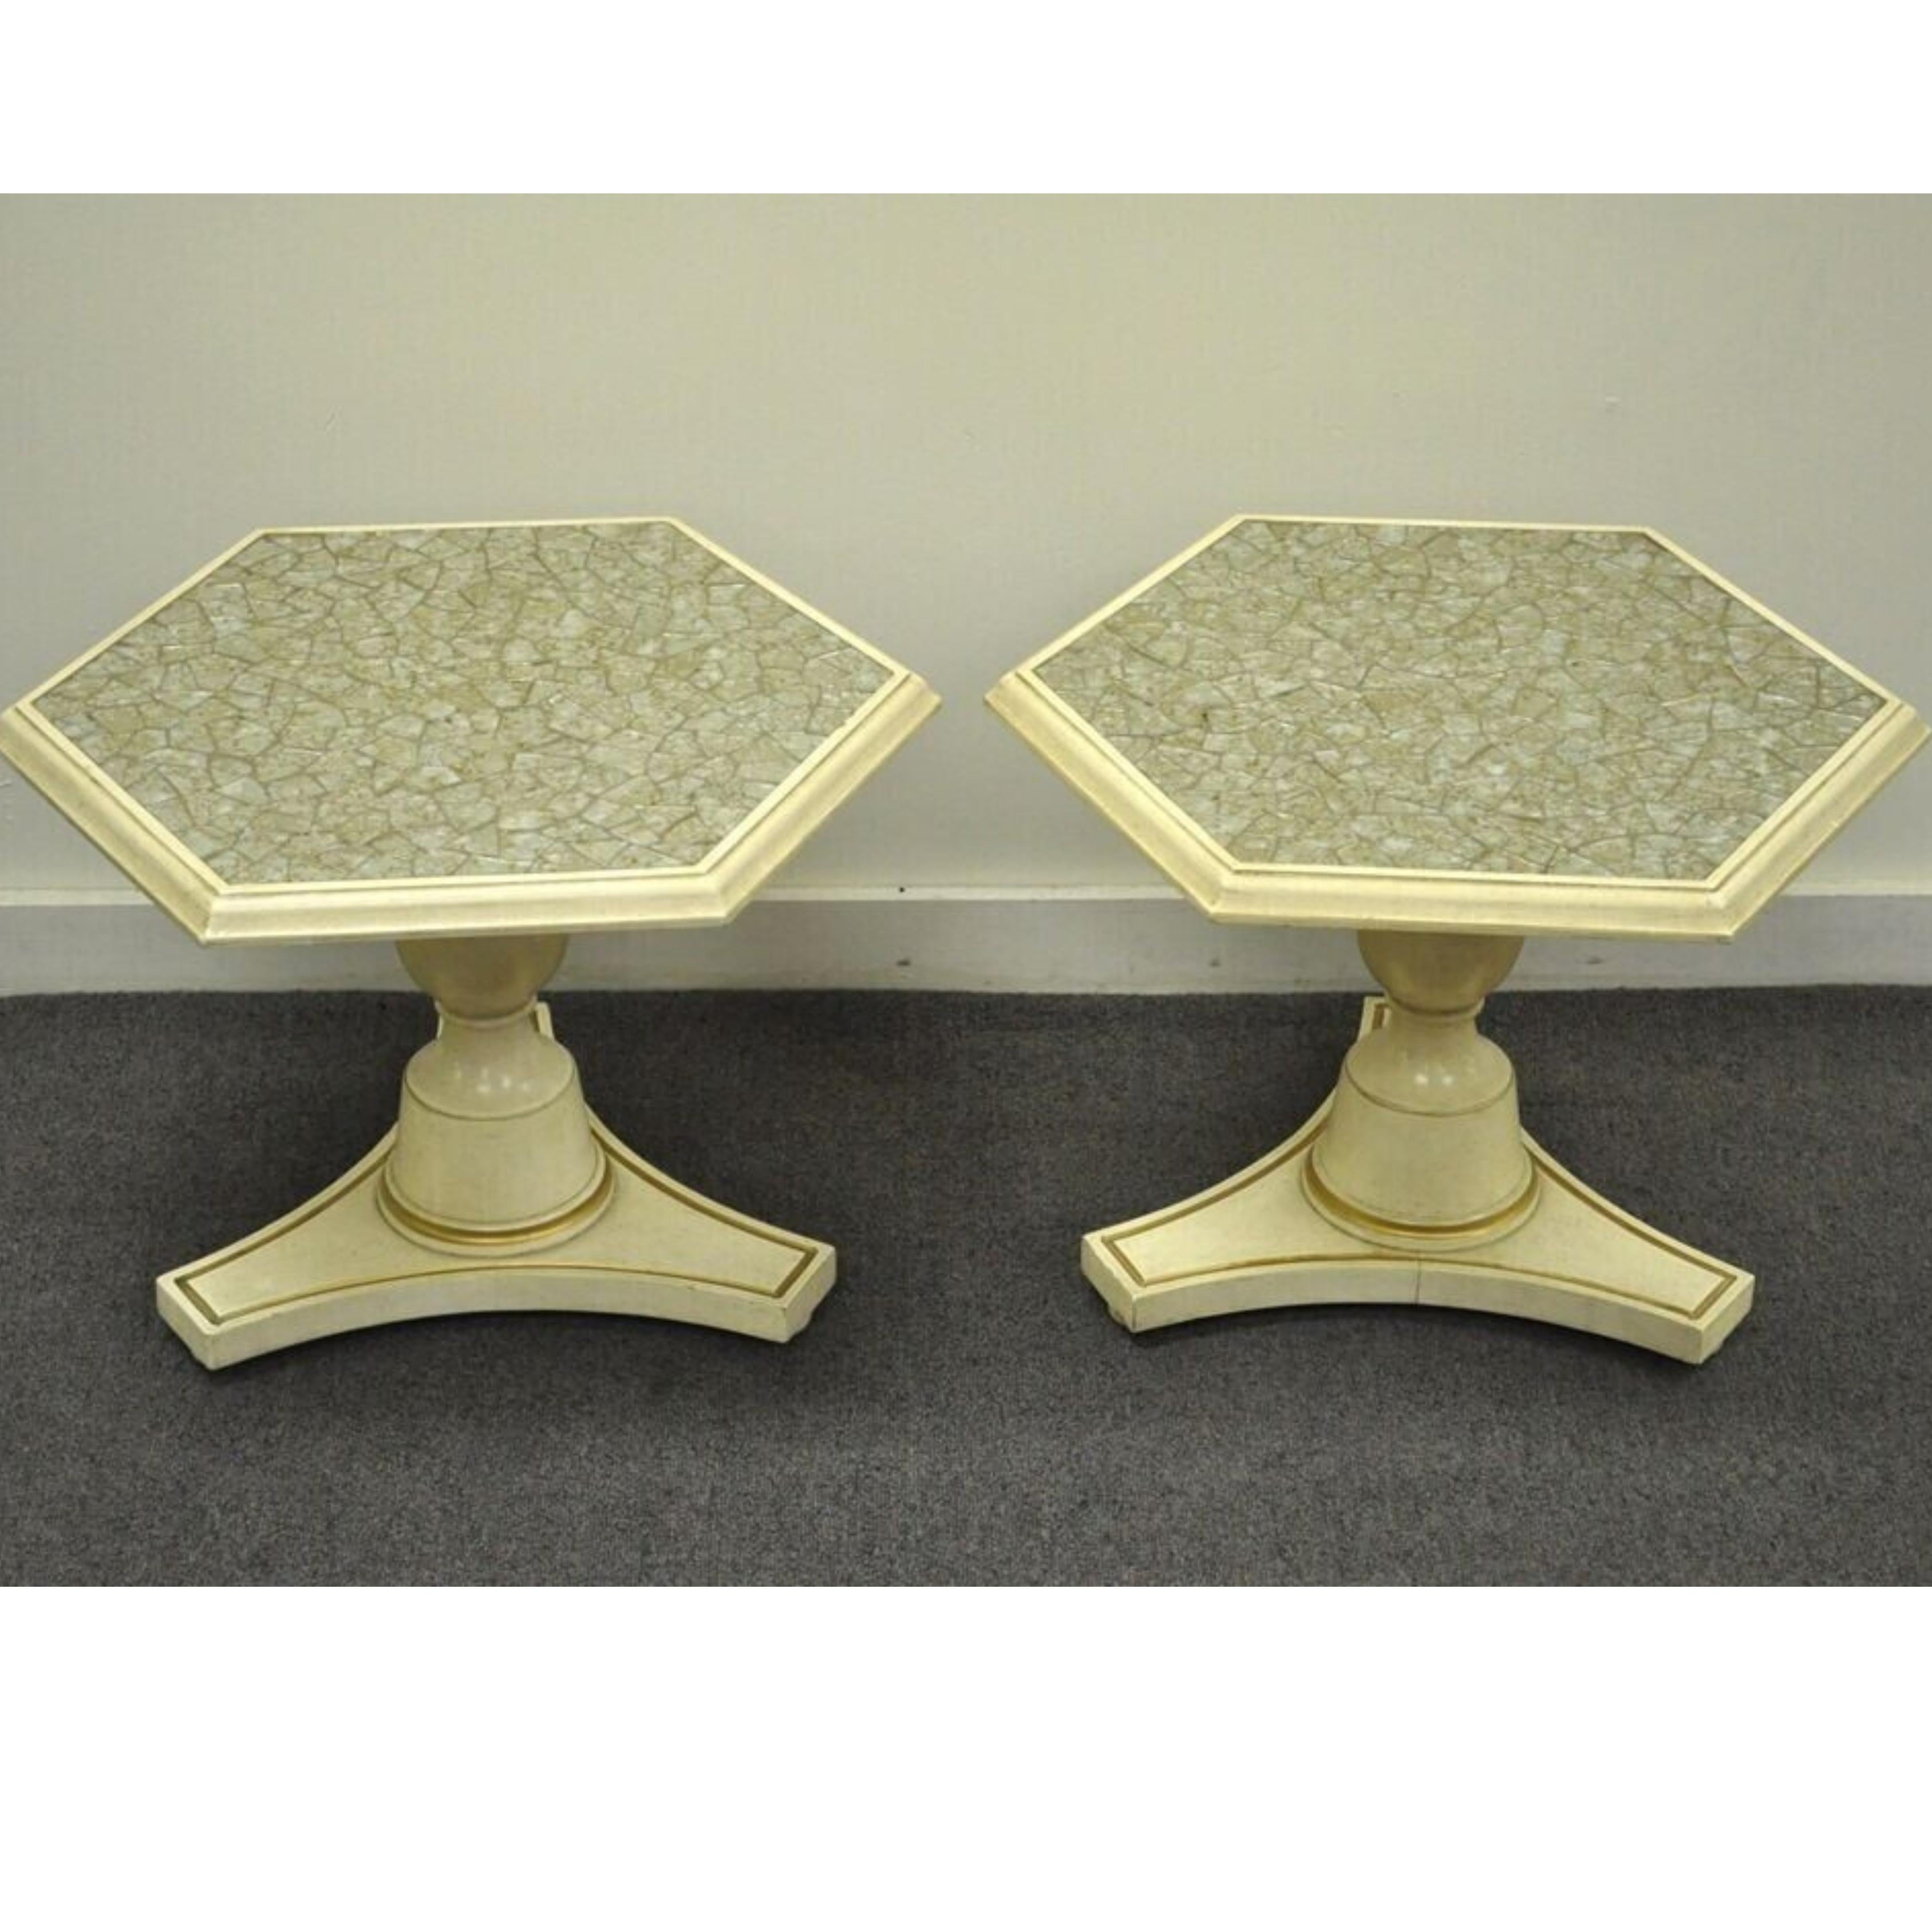 Hollywood Regency Mosaic Glass Tile Top Low Pedestal Side Tables - a Pair For Sale 1